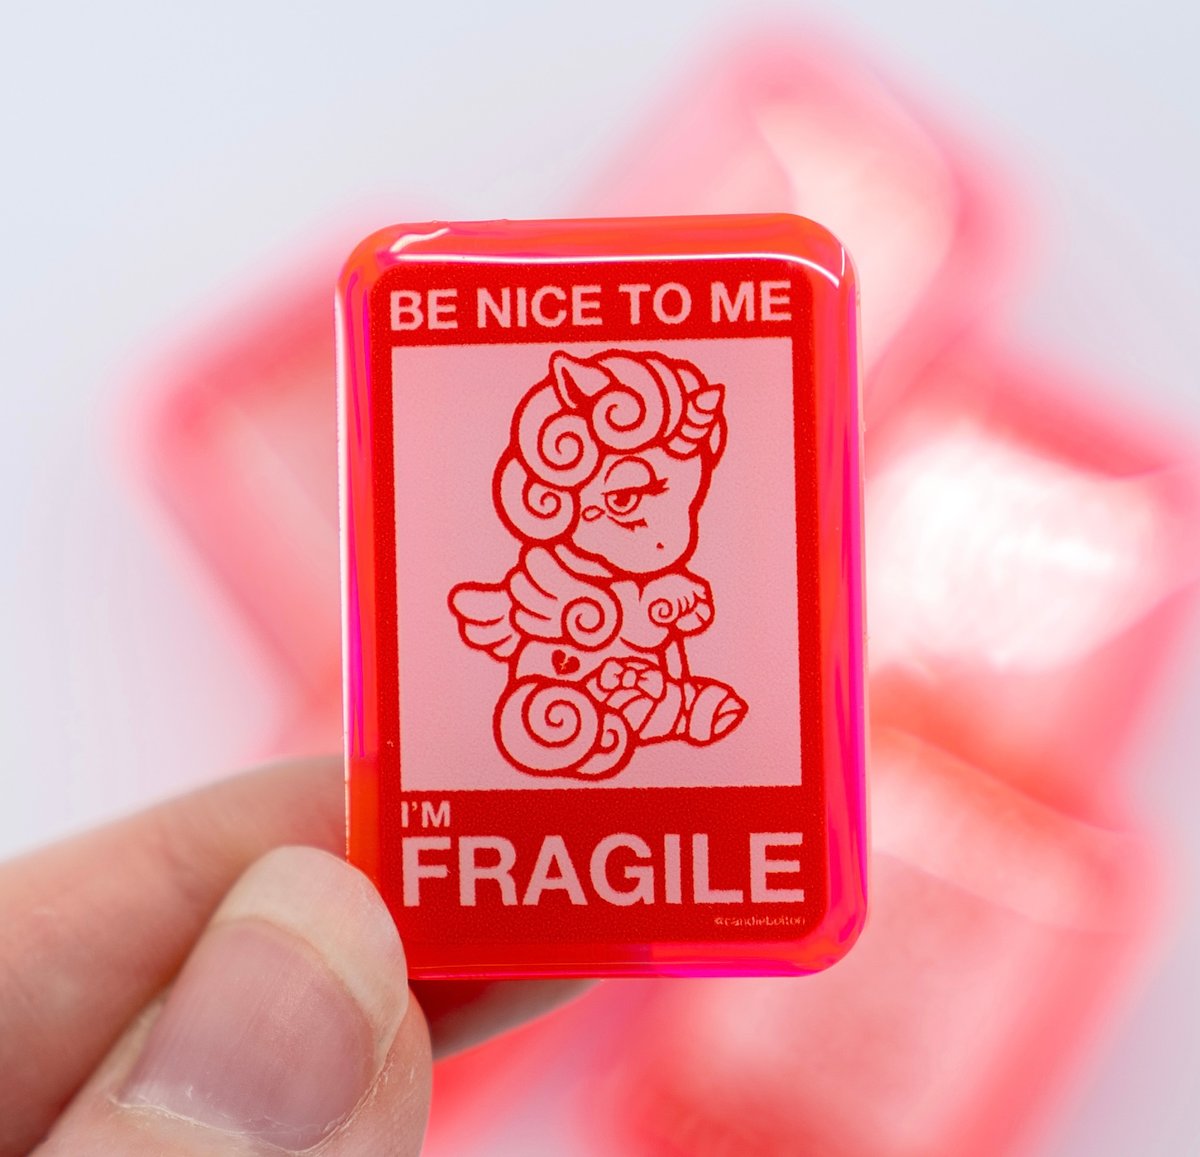 Image of Fragile Pin and Sticker set